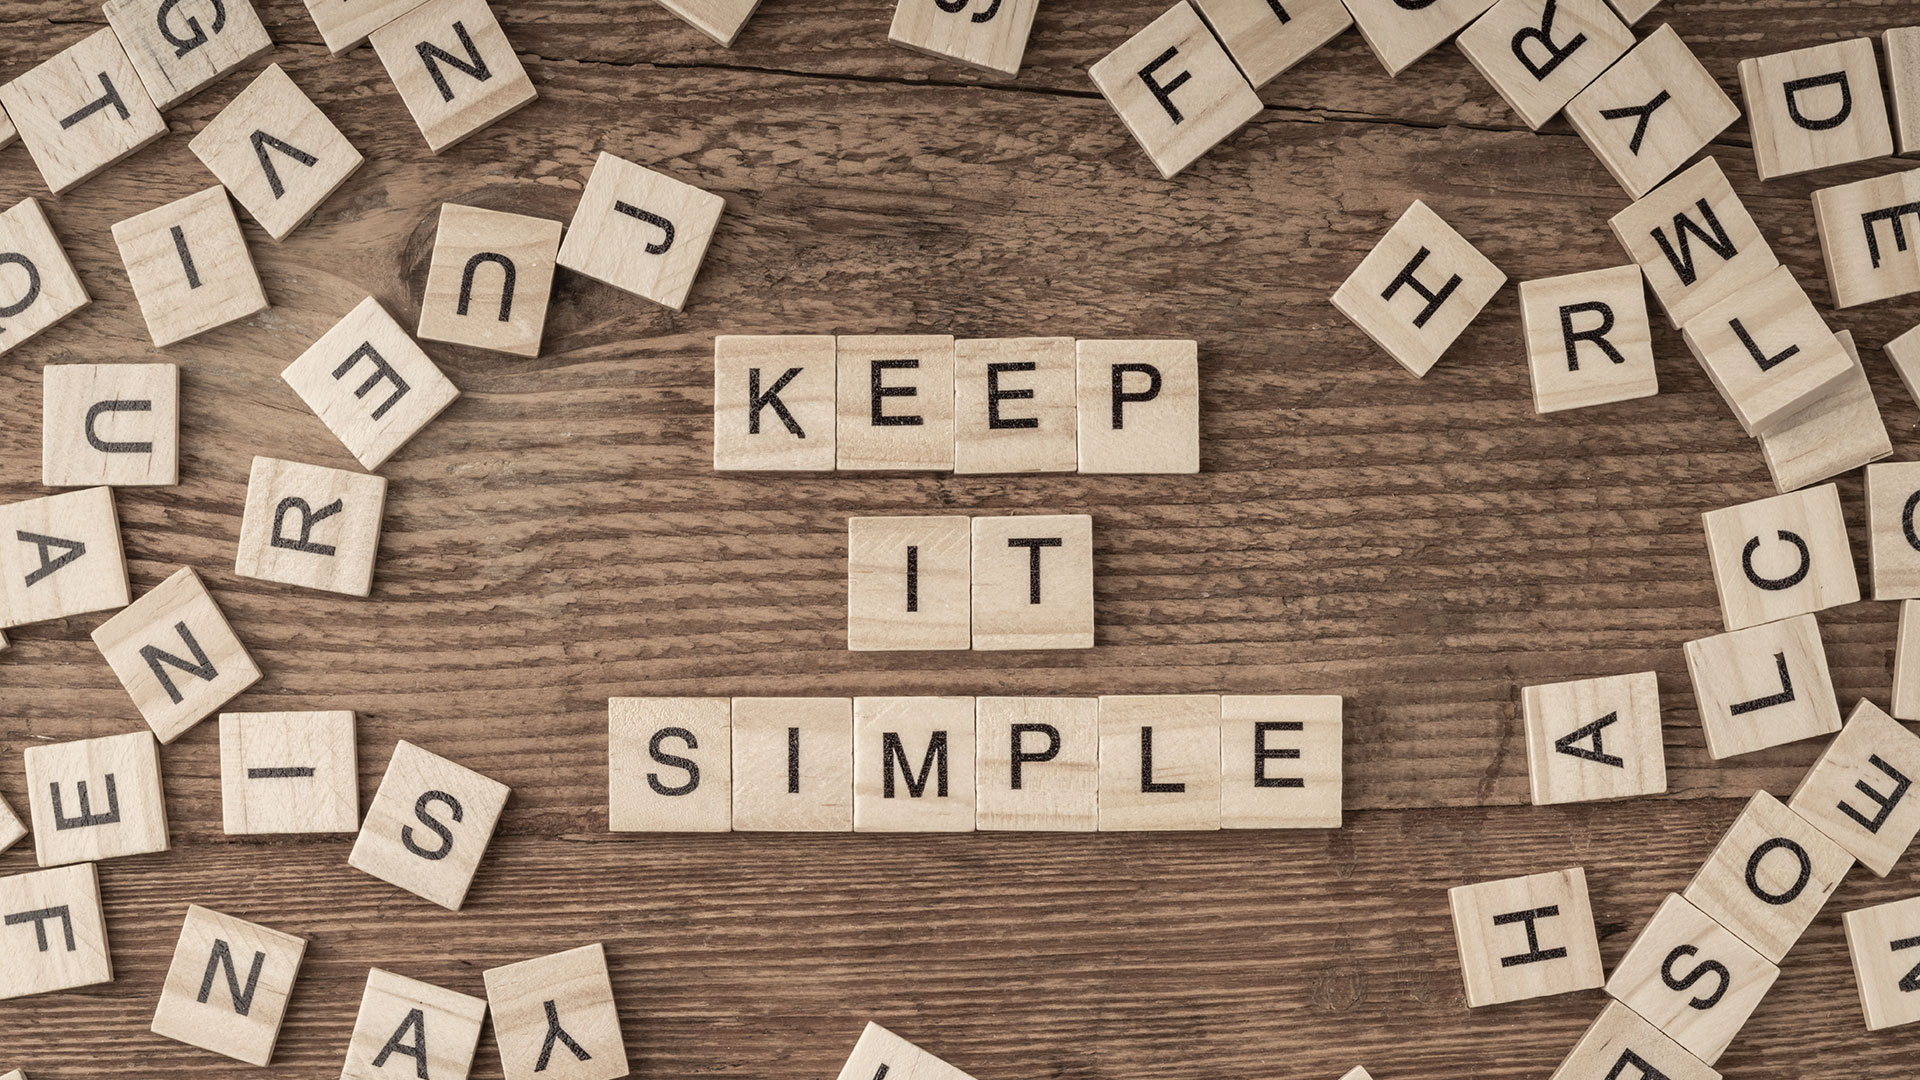 Simplifying complexity – Crafting an effective marketing message